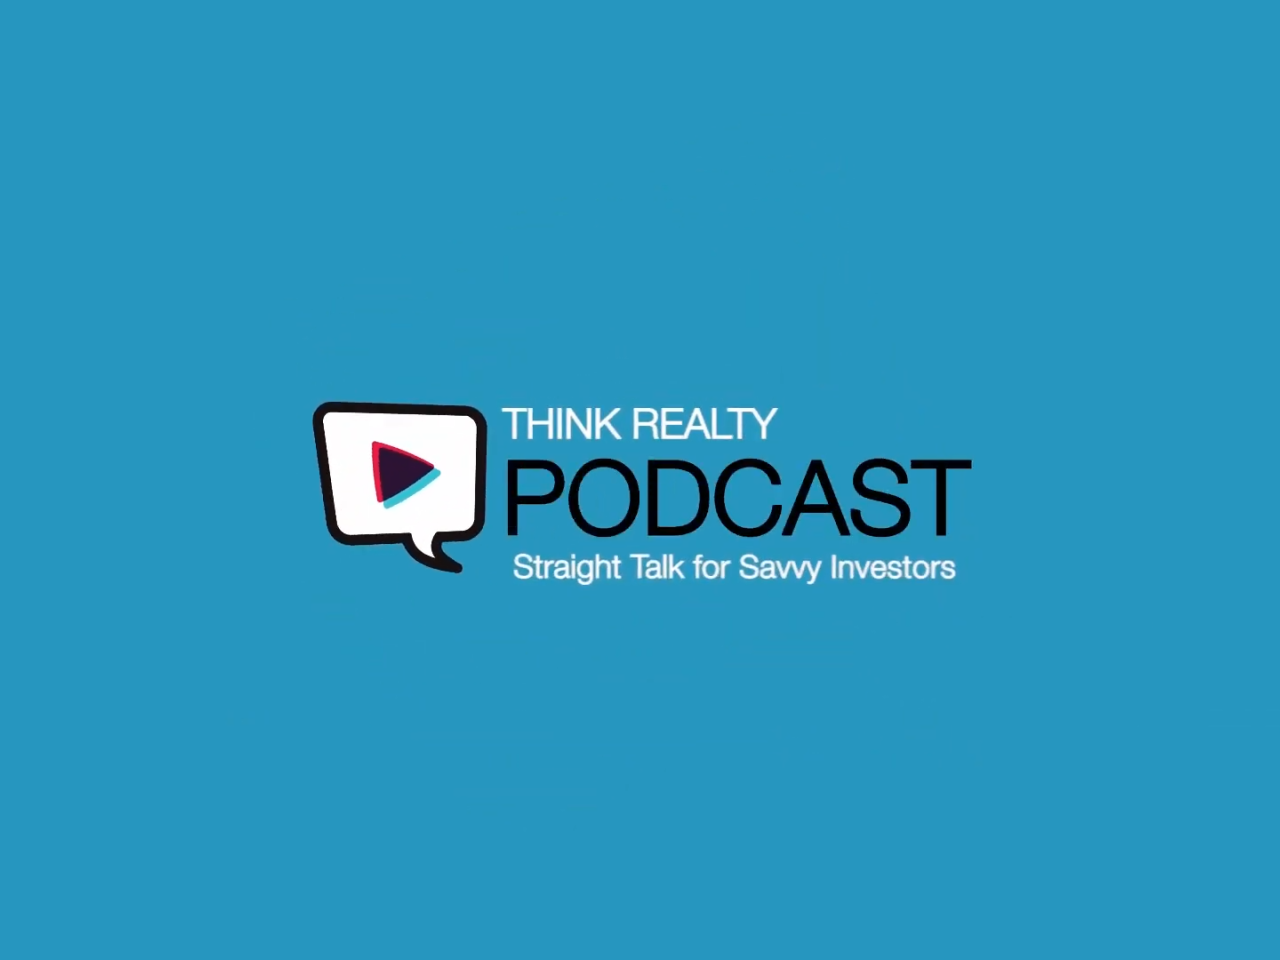 Think Realty Podcast #293 featuring Land Betterment’s Kirk Taylor